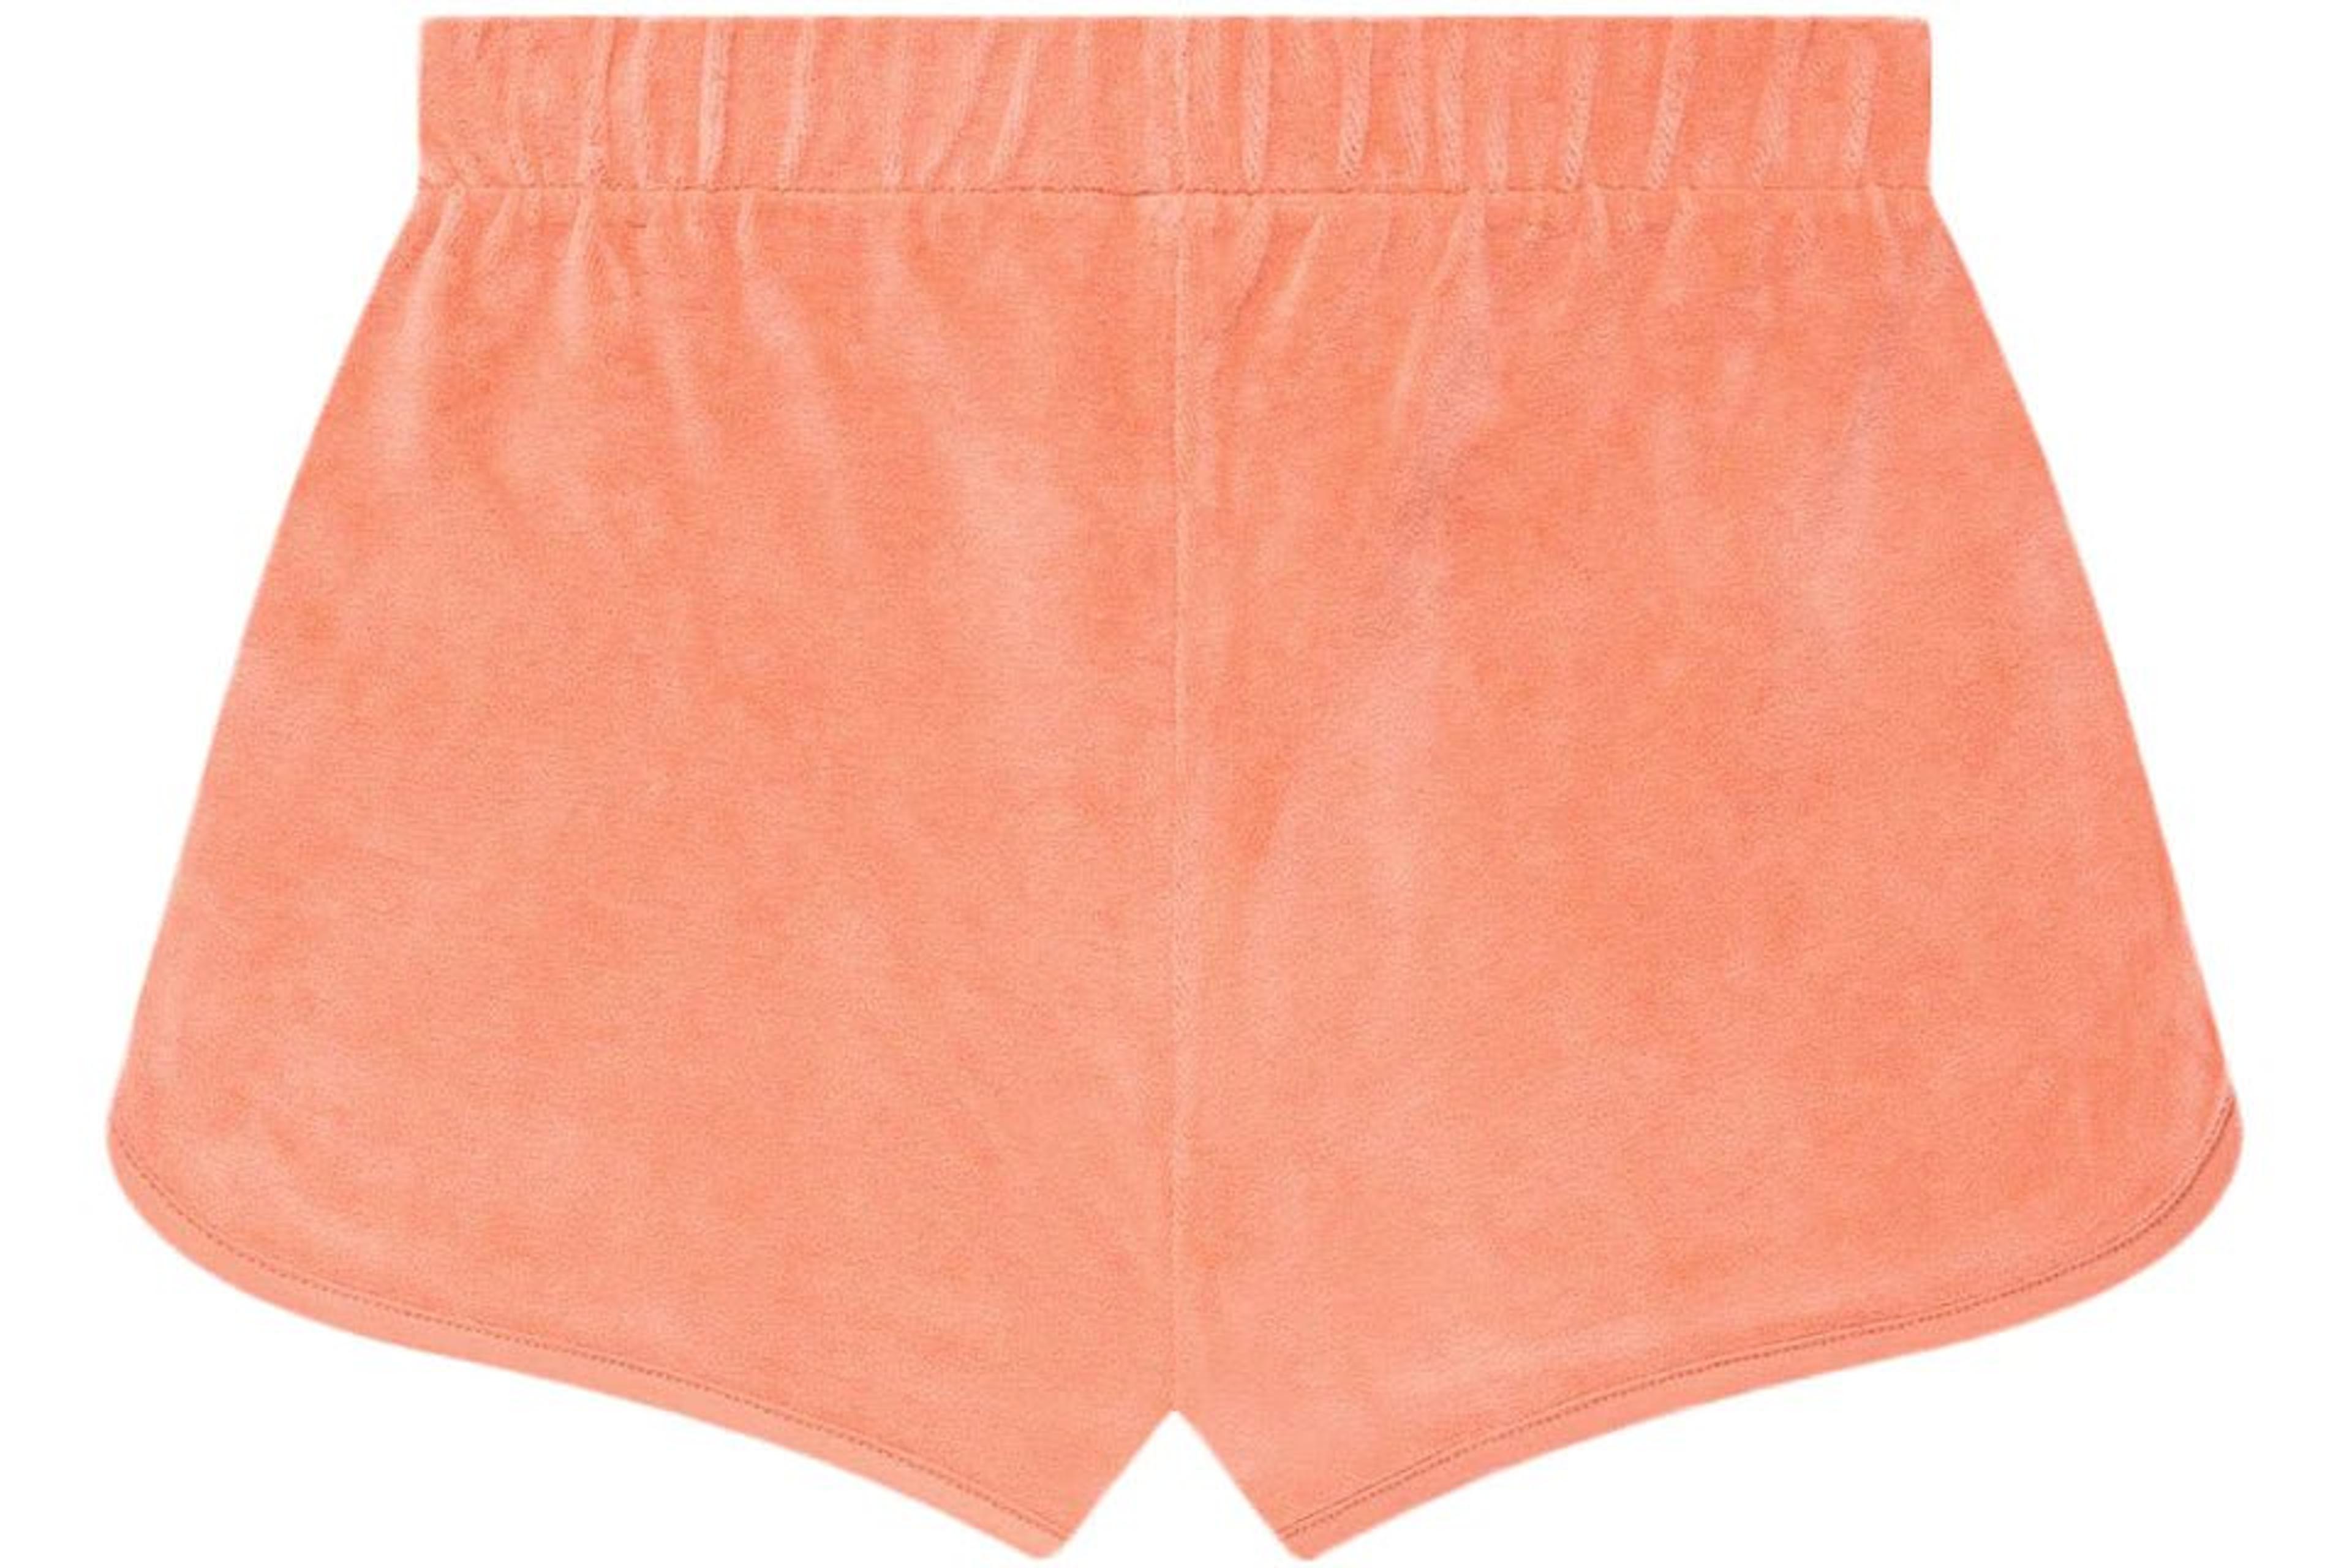 Alternate View 1 of Fear of God Essentials Women's Velour Short Coral